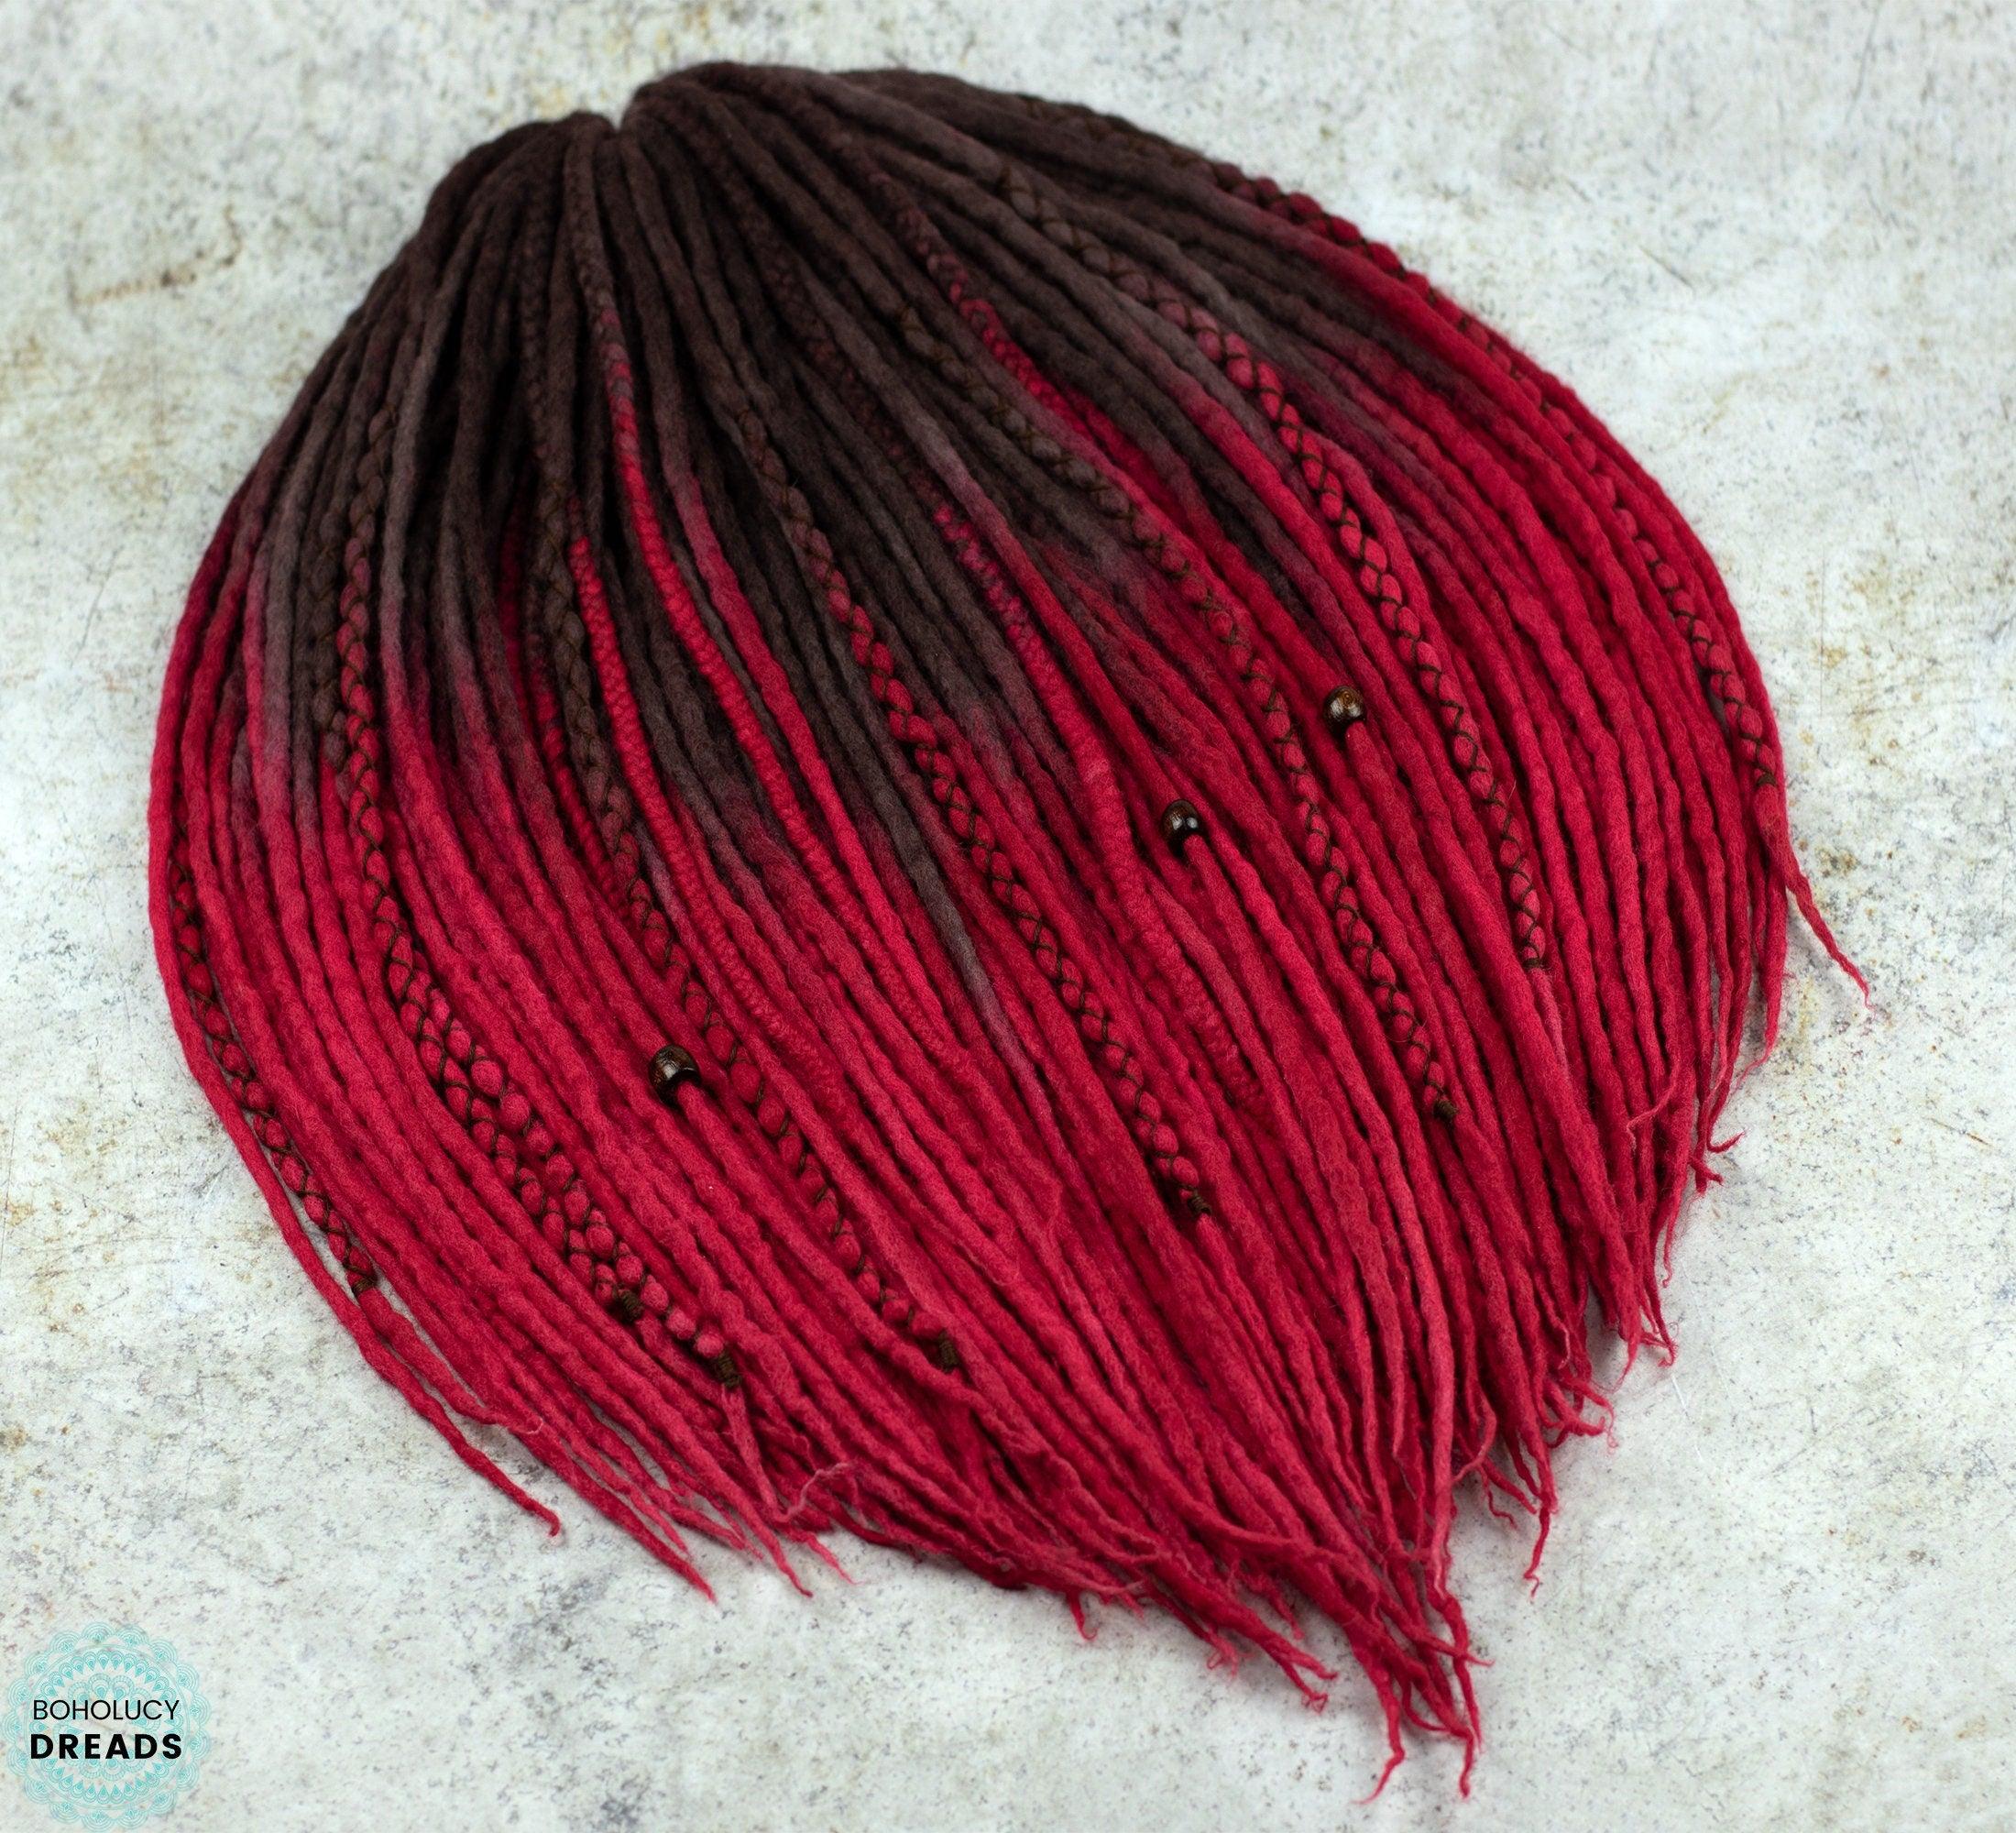 Cherry ombre hair extensions